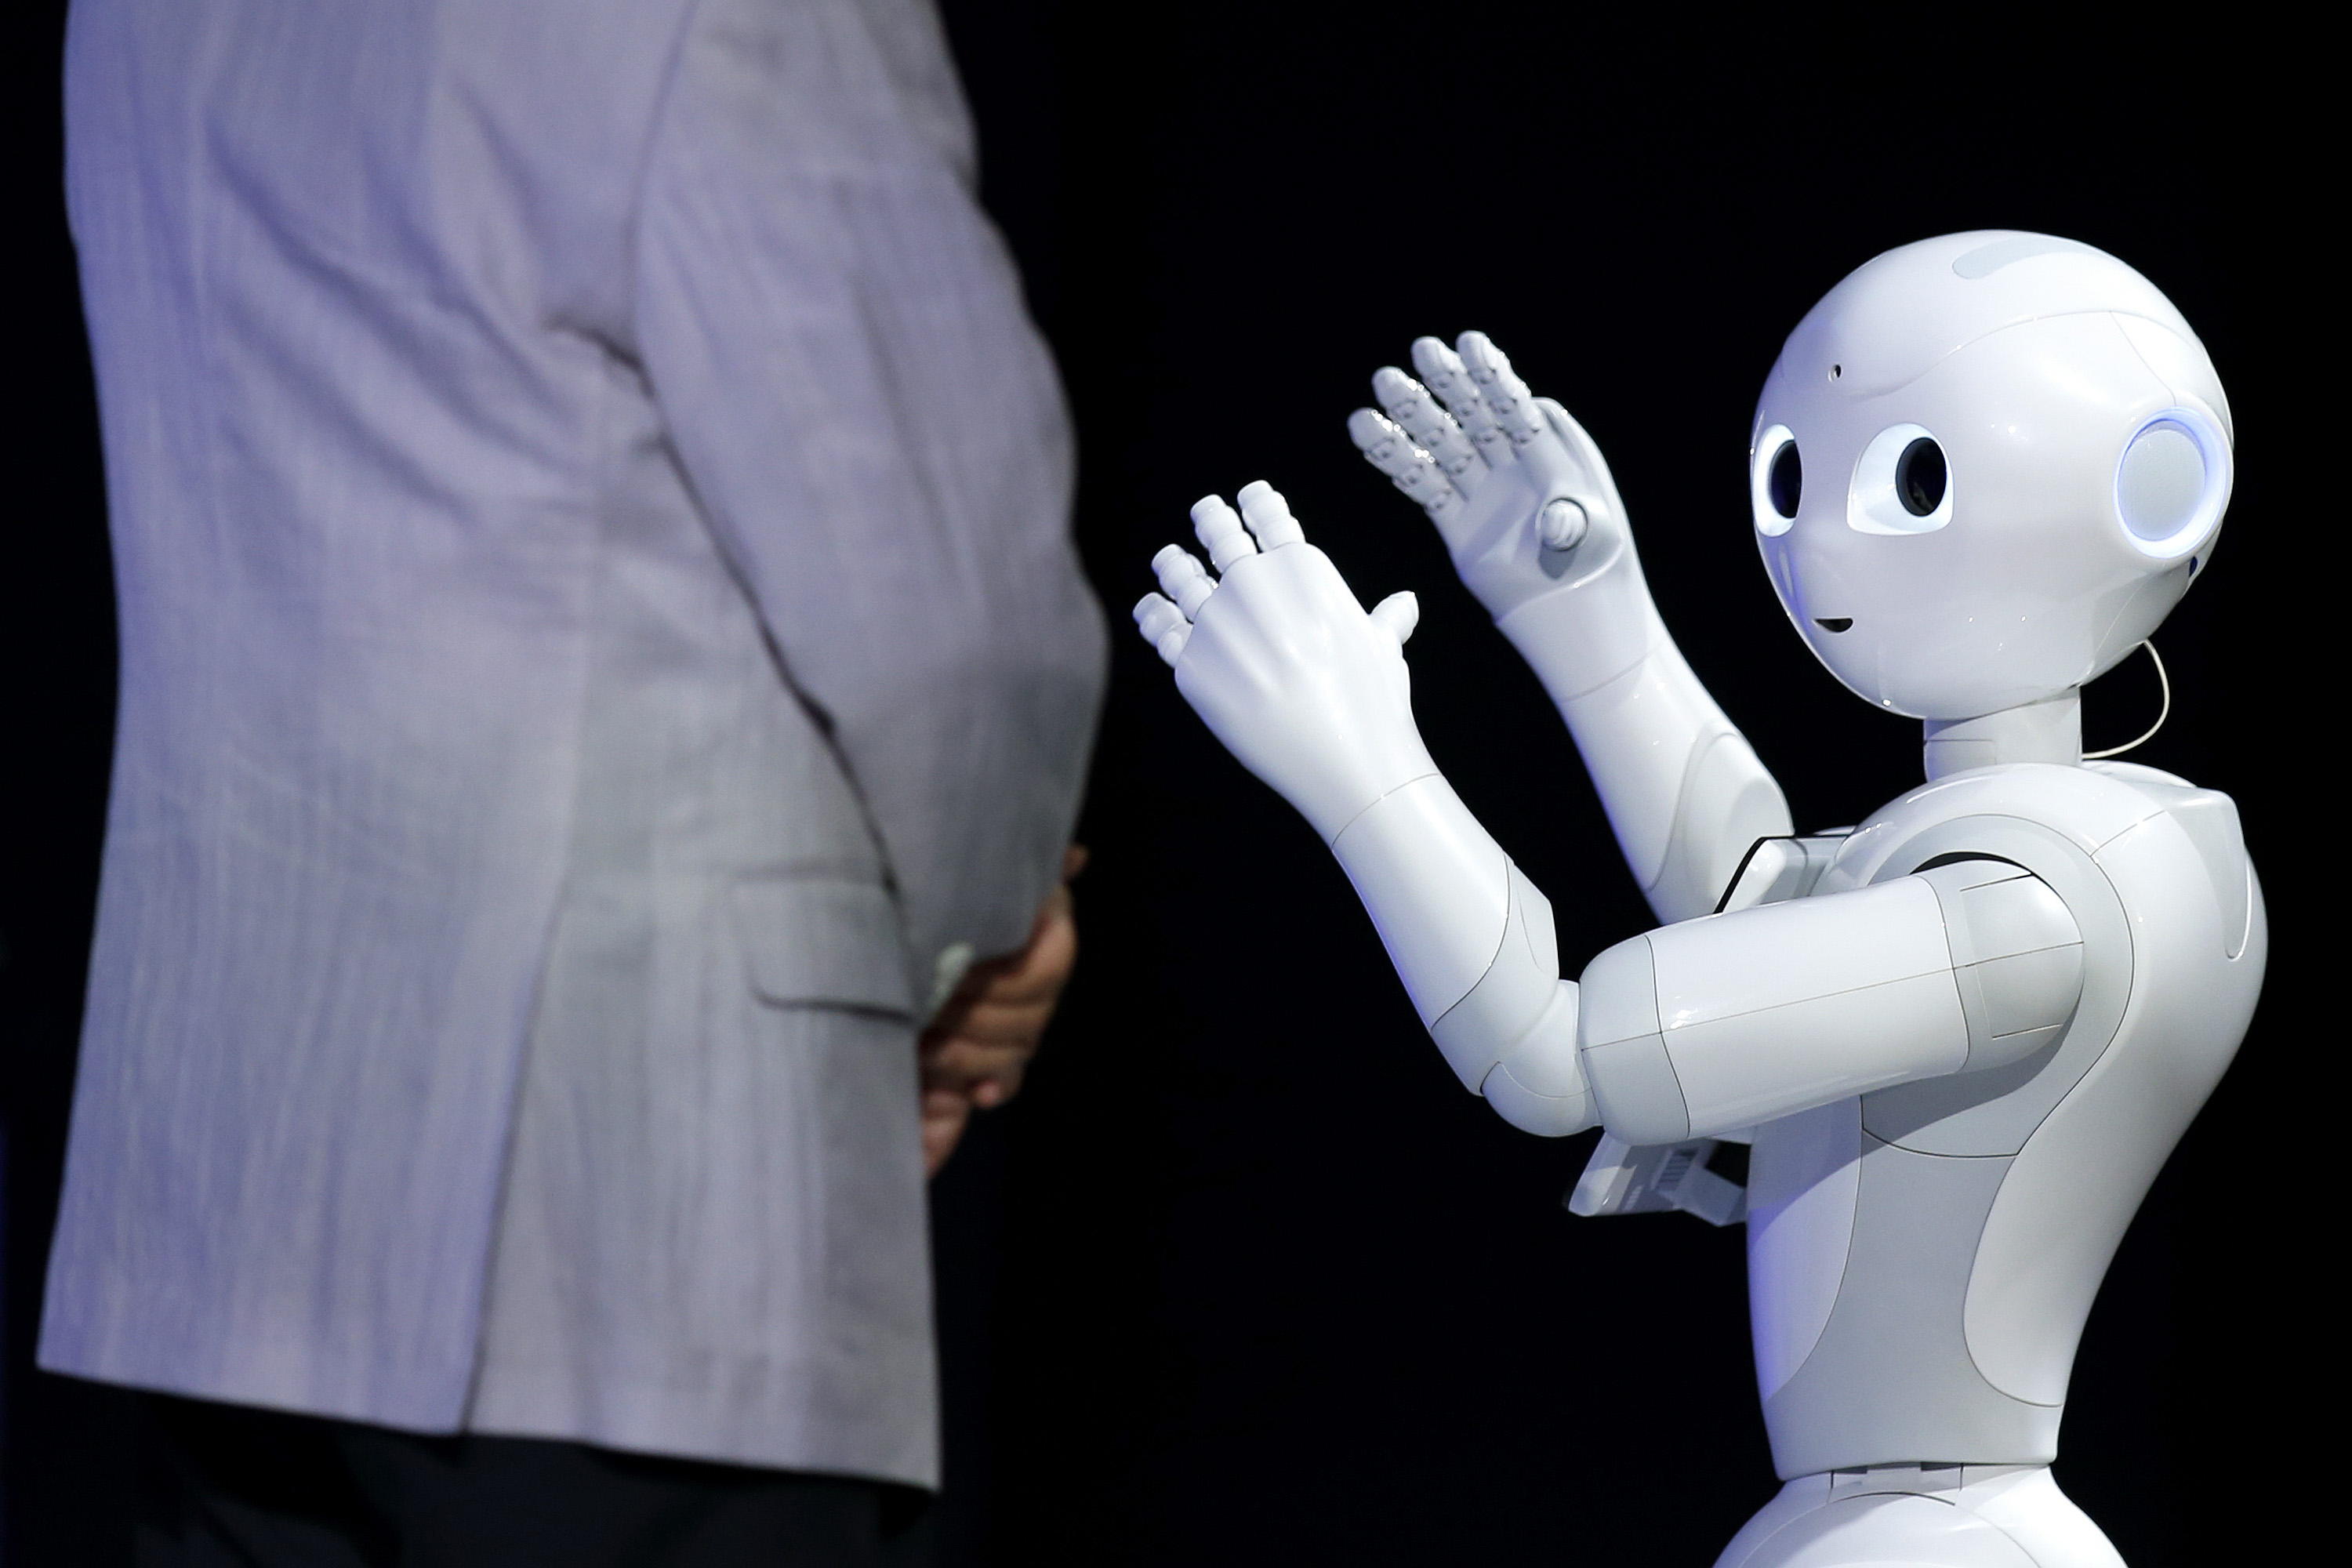 The humanoid robot Pepper, developed by SoftBank Corp.'s Aldebaran Robotics unit, performs next to Masayoshi Son, chairman and chief executive officer of the telecom giant, at SoftBank World 2014 in Tokyo on Tuesday. | BLOOMBERG